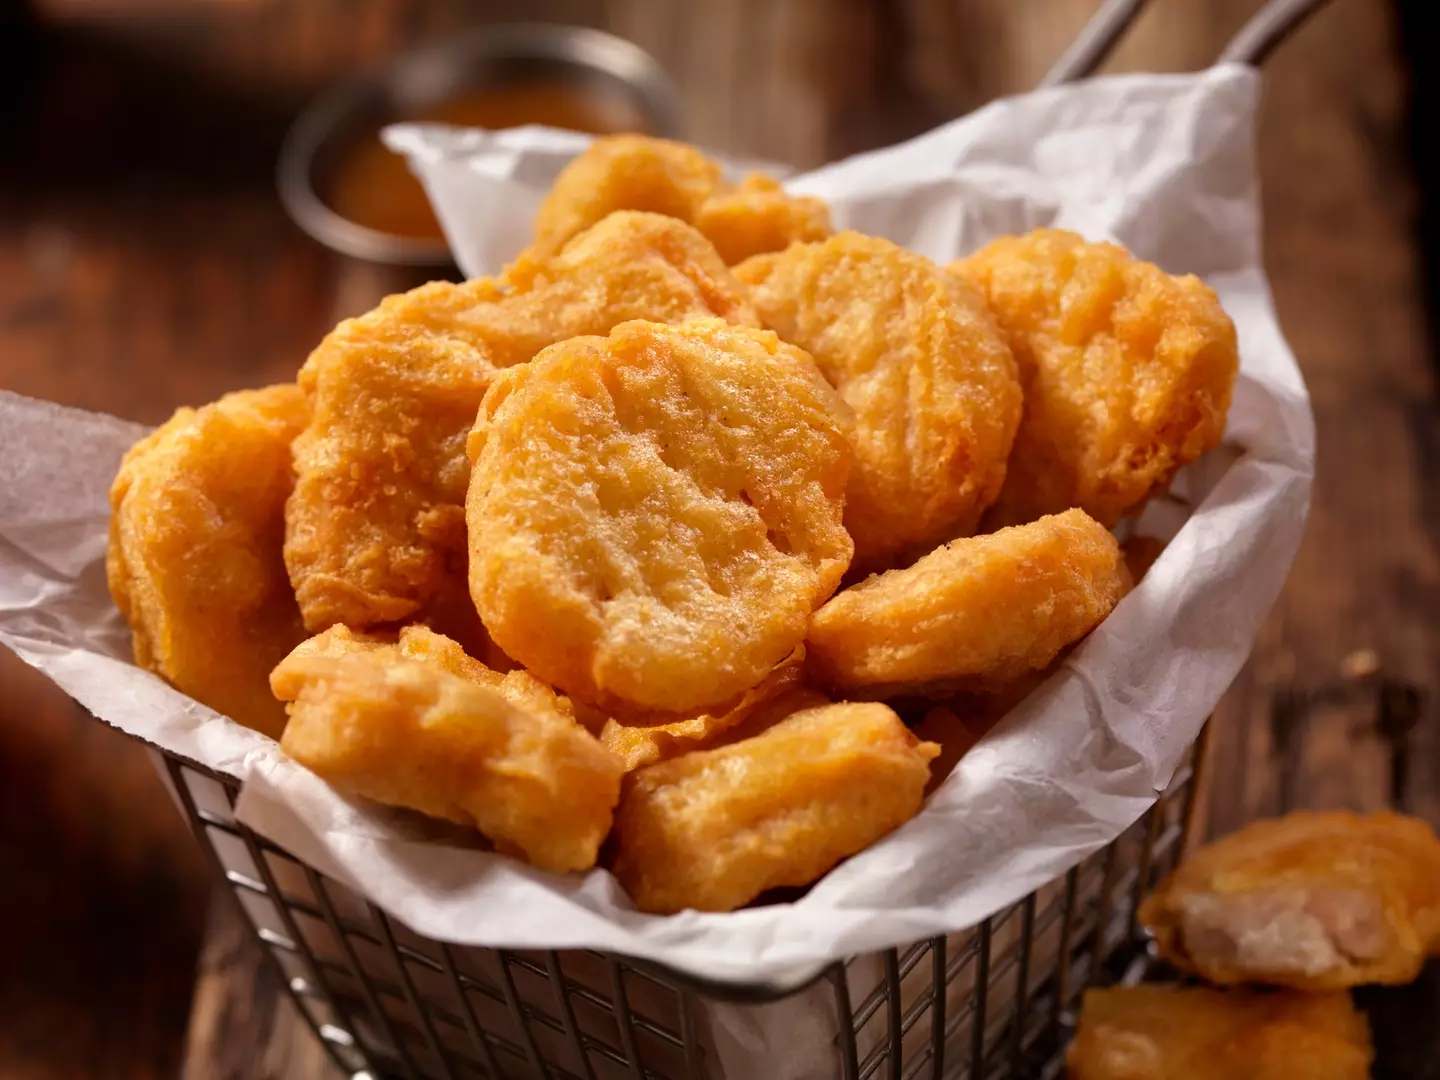 One expert has ranked the different chicken nuggets. (LauriPatterson/Getty Images)